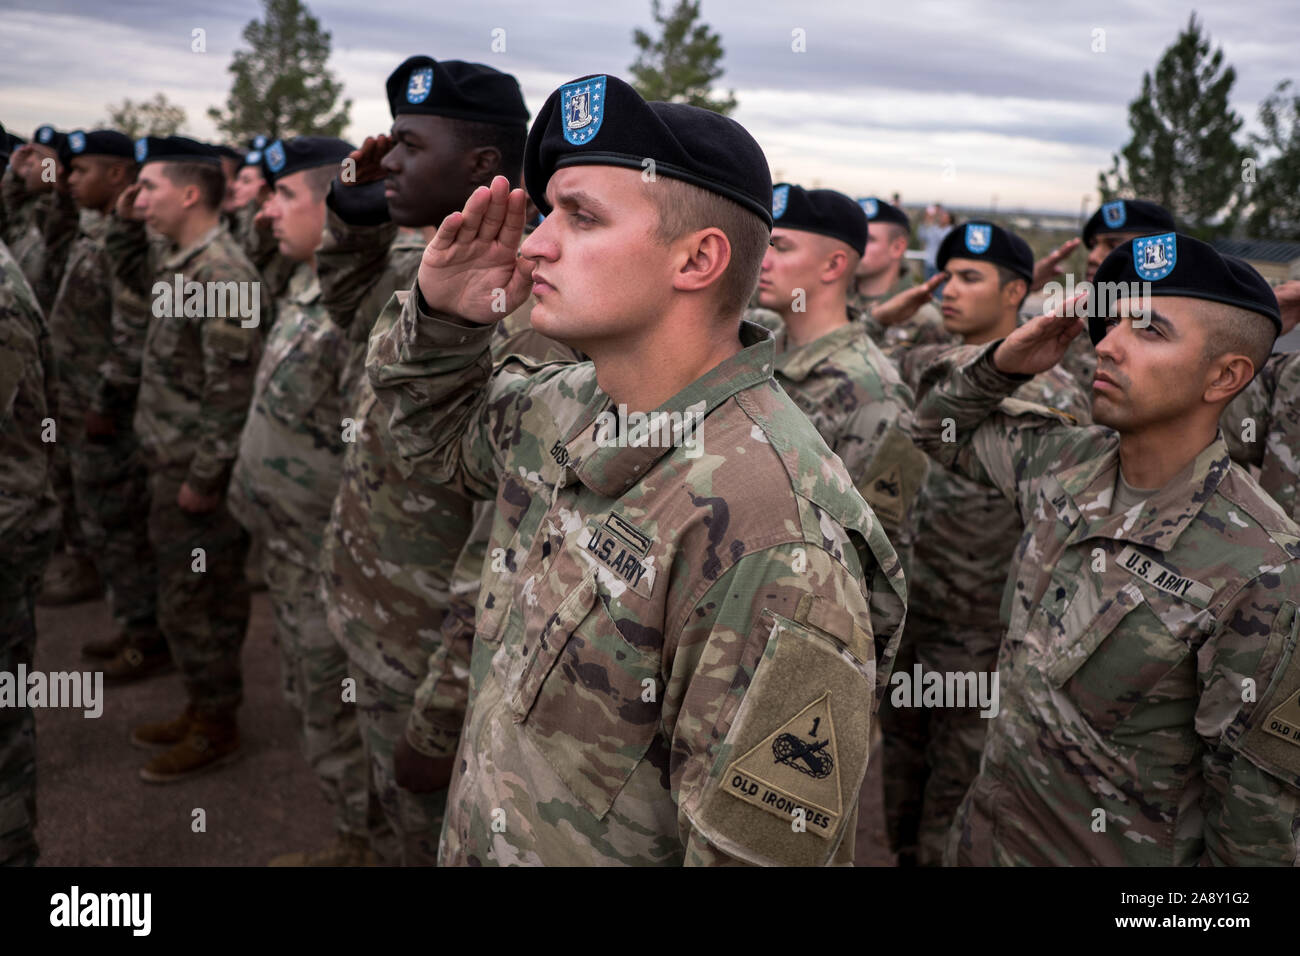 El Paso, Texas, USA. 11th Nov, 2019. Soldiers of 1st Battalion, 77th Armor Regiment, 3rd Armored Brigade Combat Team ''Bulldog'', 1st Armored Division, salute an American flag as it is raised during a Veteran's Day celebration in El Paso, Texas. Credit: Joel Angel Juarez/ZUMA Wire/Alamy Live News Stock Photo